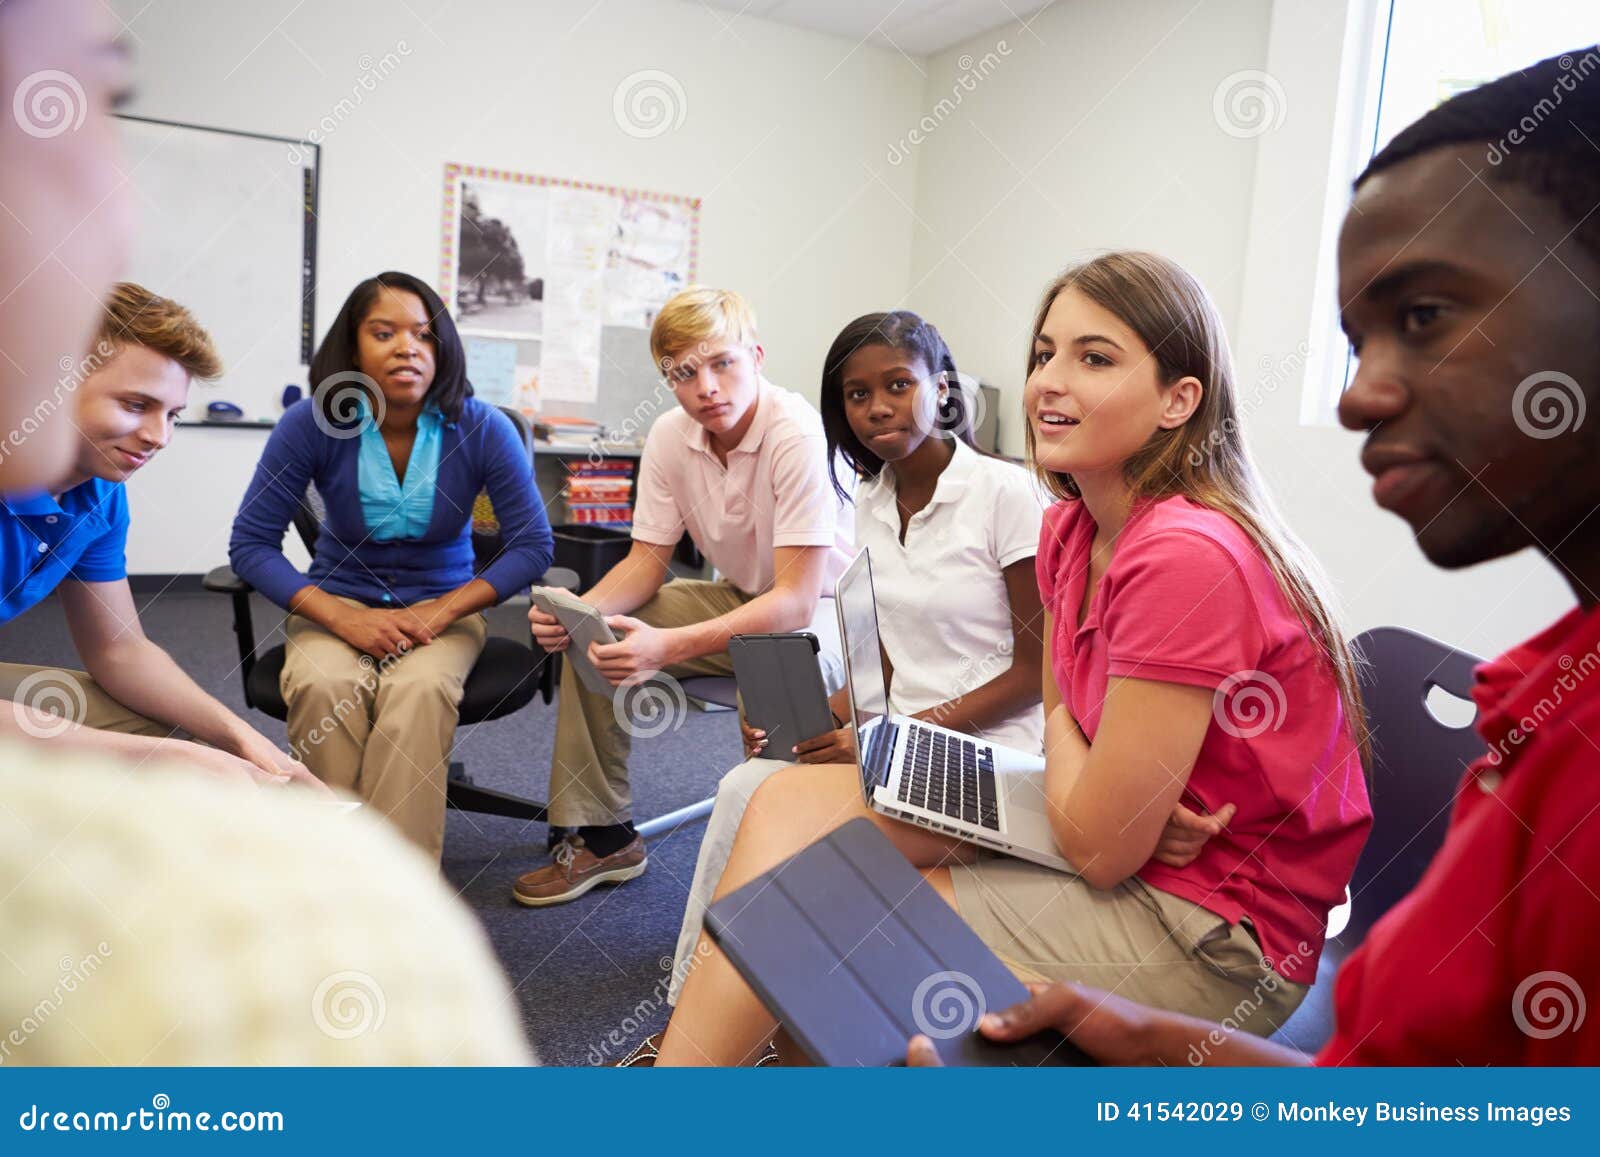 high school students taking part in group discussi